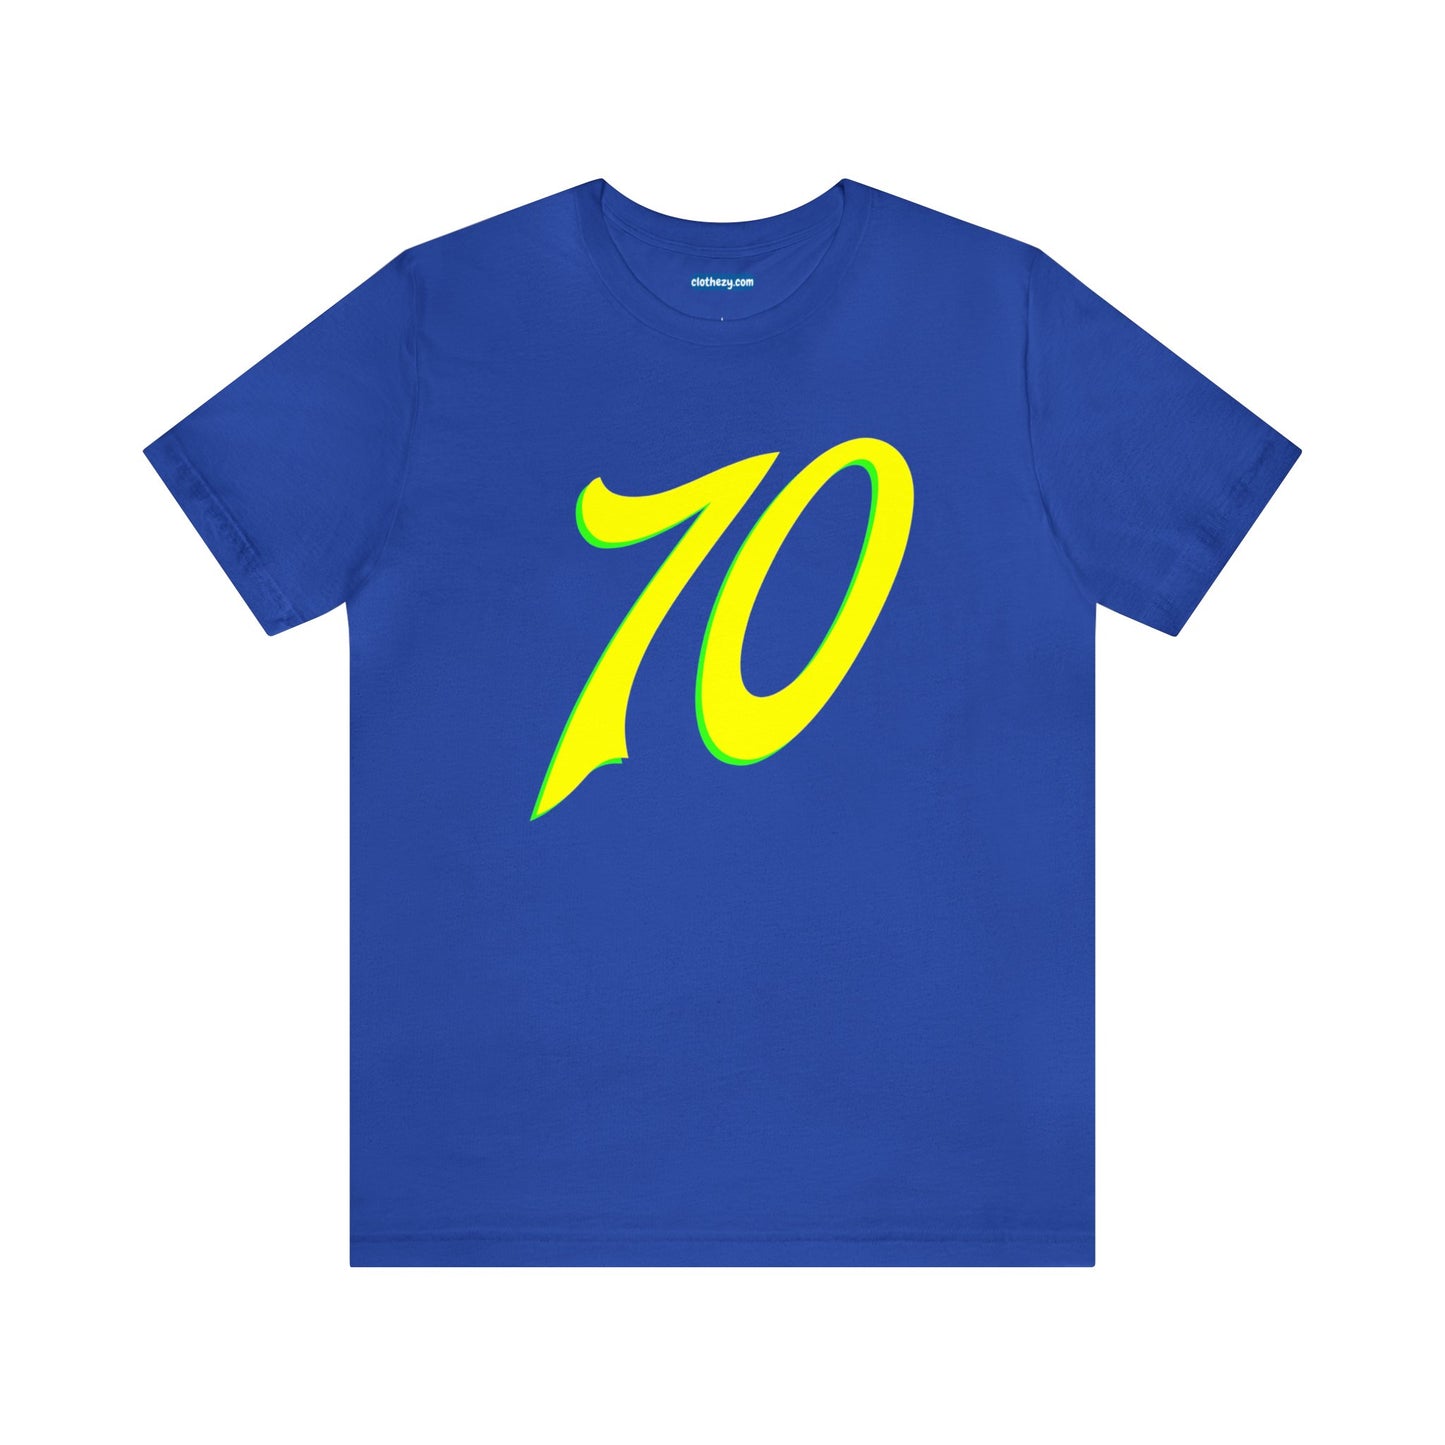 Number 70 Design - Soft Cotton Tee for birthdays and celebrations, Gift for friends and family, Multiple Options by clothezy.com in White Size Small - Buy Now